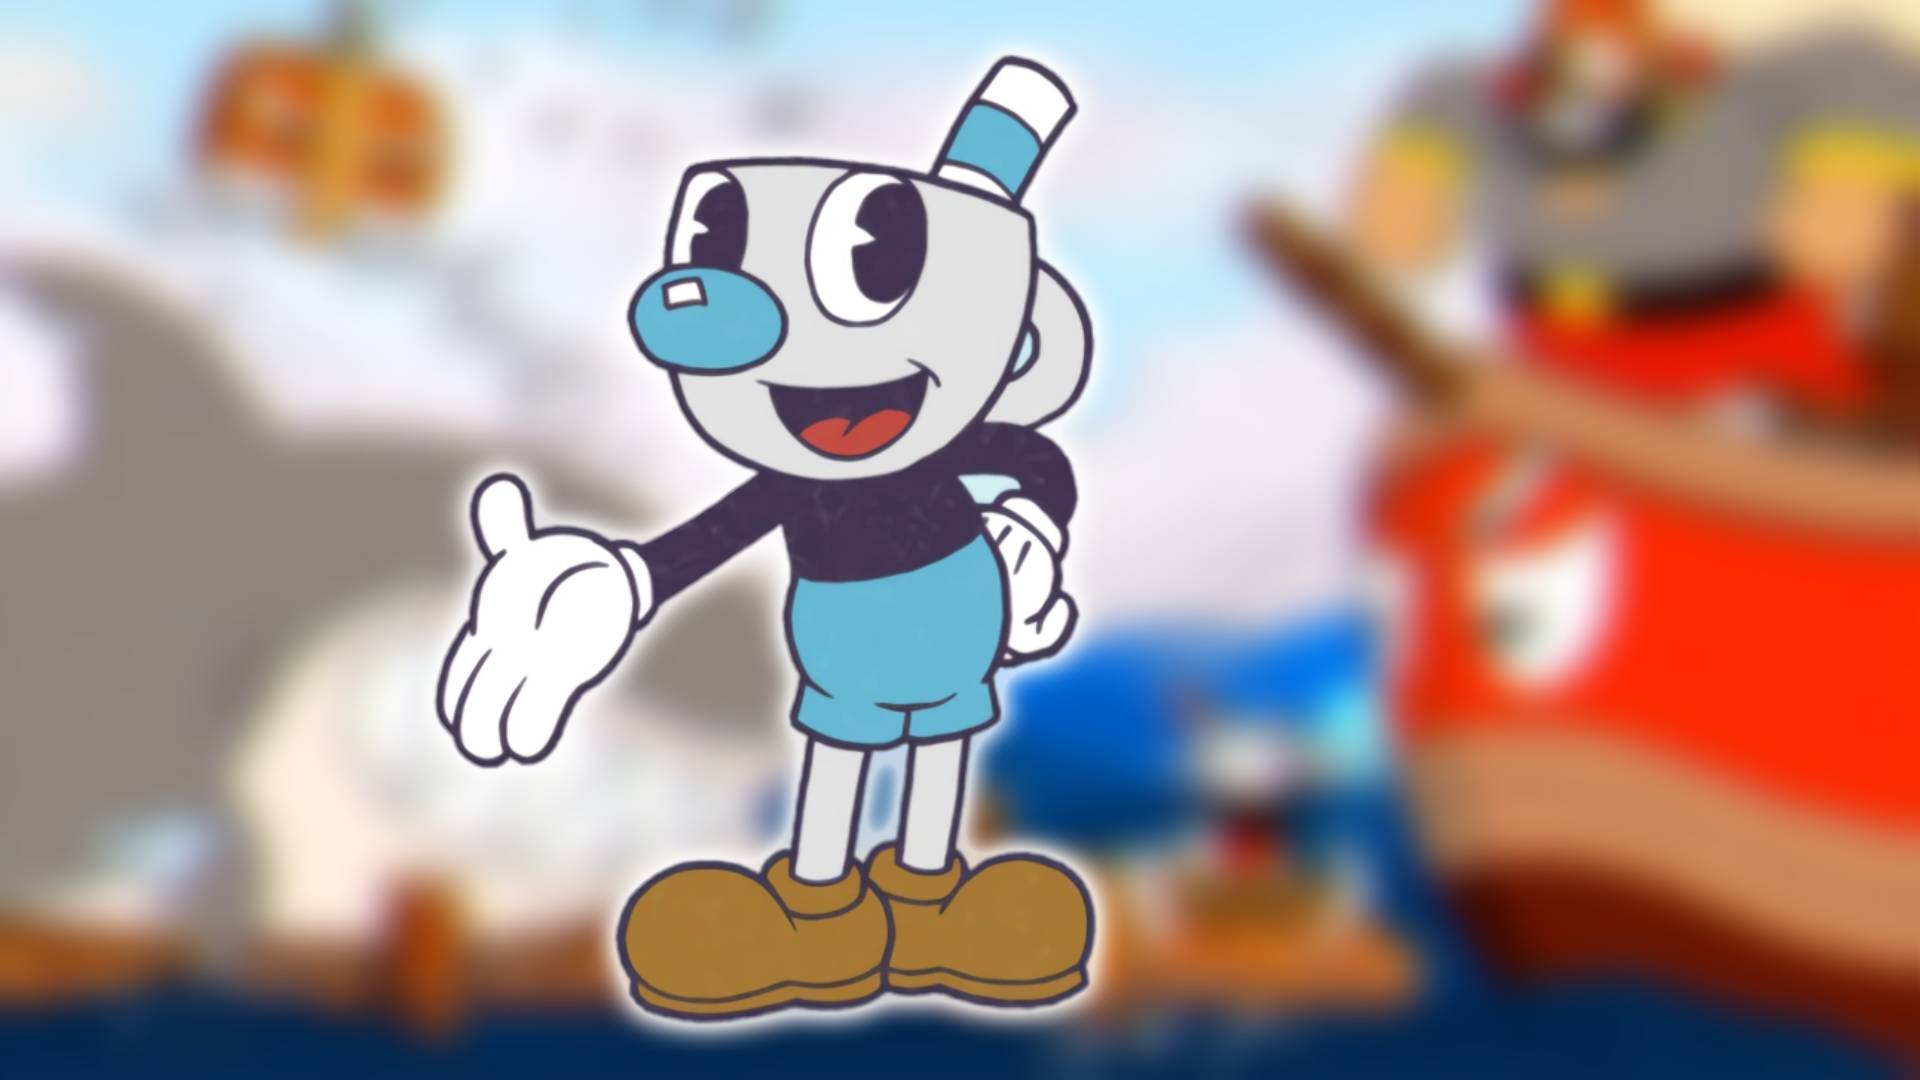 Cuphead characters: a cartoon character with a mug for a head and dressed in blue is visible